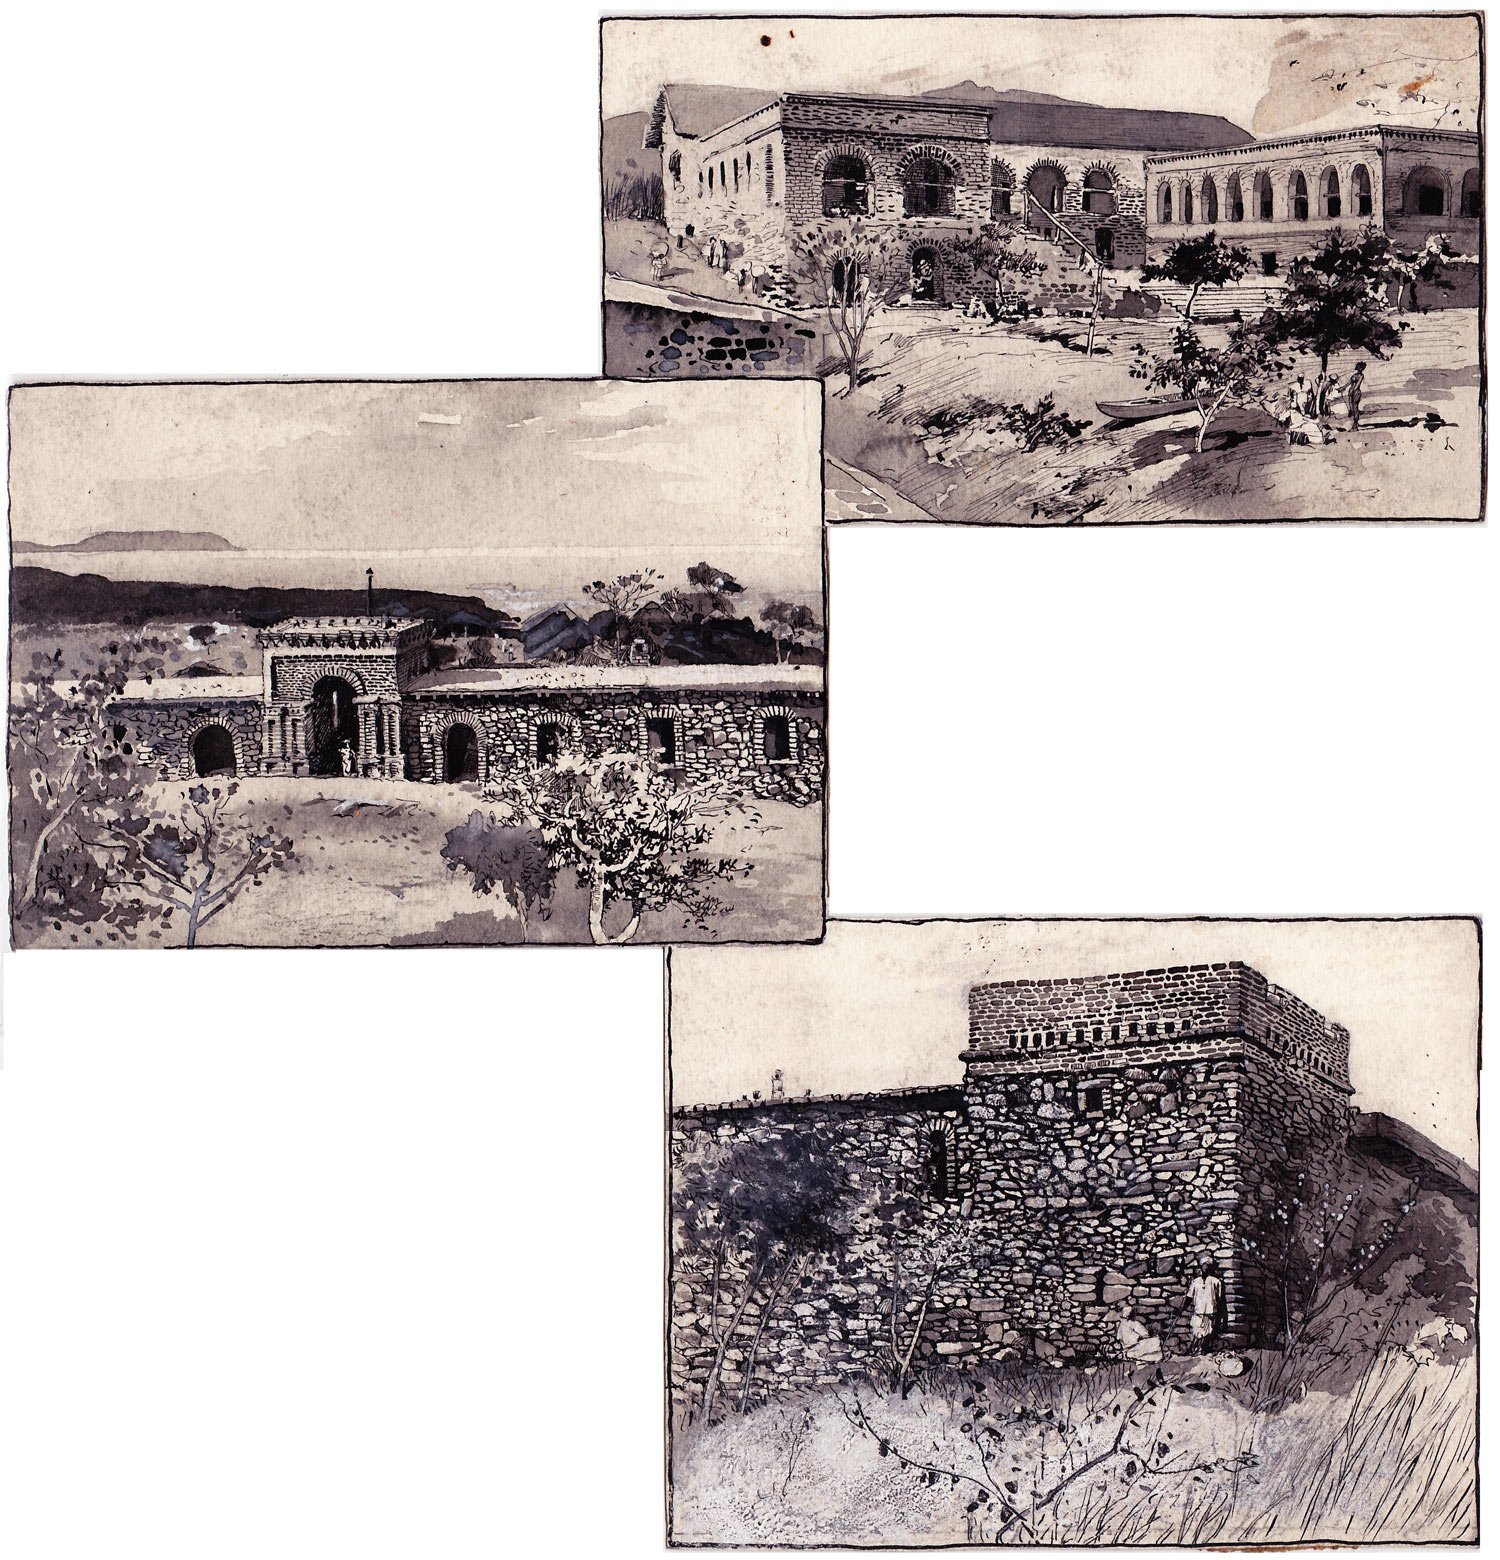   Henry Fenn (1838-1911)   Mpala Mission - Set of 3  Ink on paper Overall: 11 5/8” x 11 1/4” Top: 3 7/8” x 6 3/4”; Middle: 4 3/8” x 6 1/4”; Bottom: 4 3/4” x 6 1/4”  “New Conditions in Central Africa,” The Century Magazine,  pg. 905 